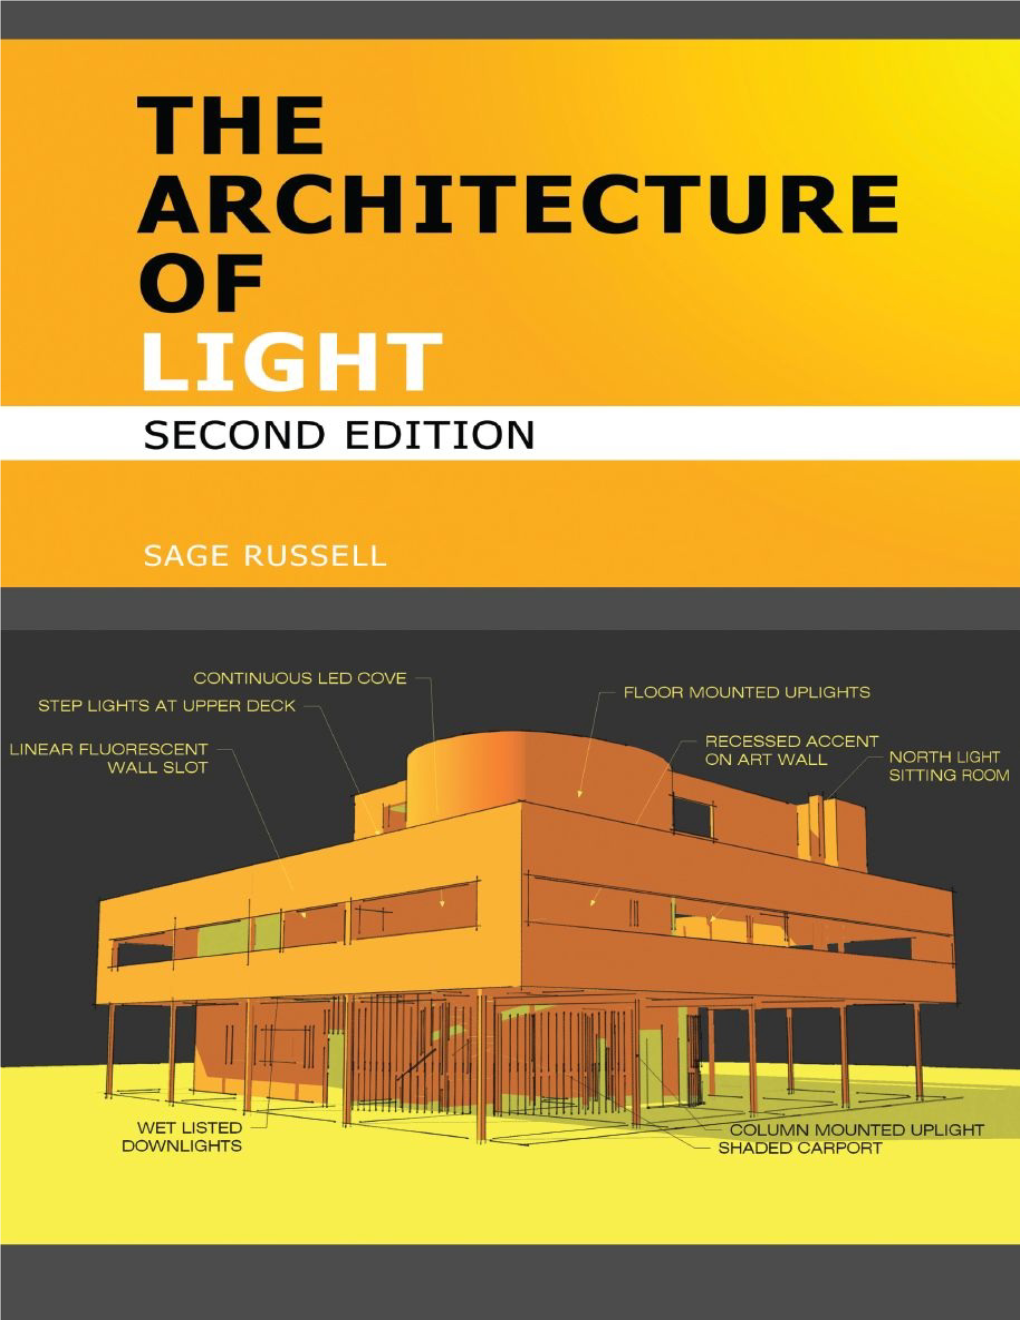 The Architecture of Light / by Sage Russell